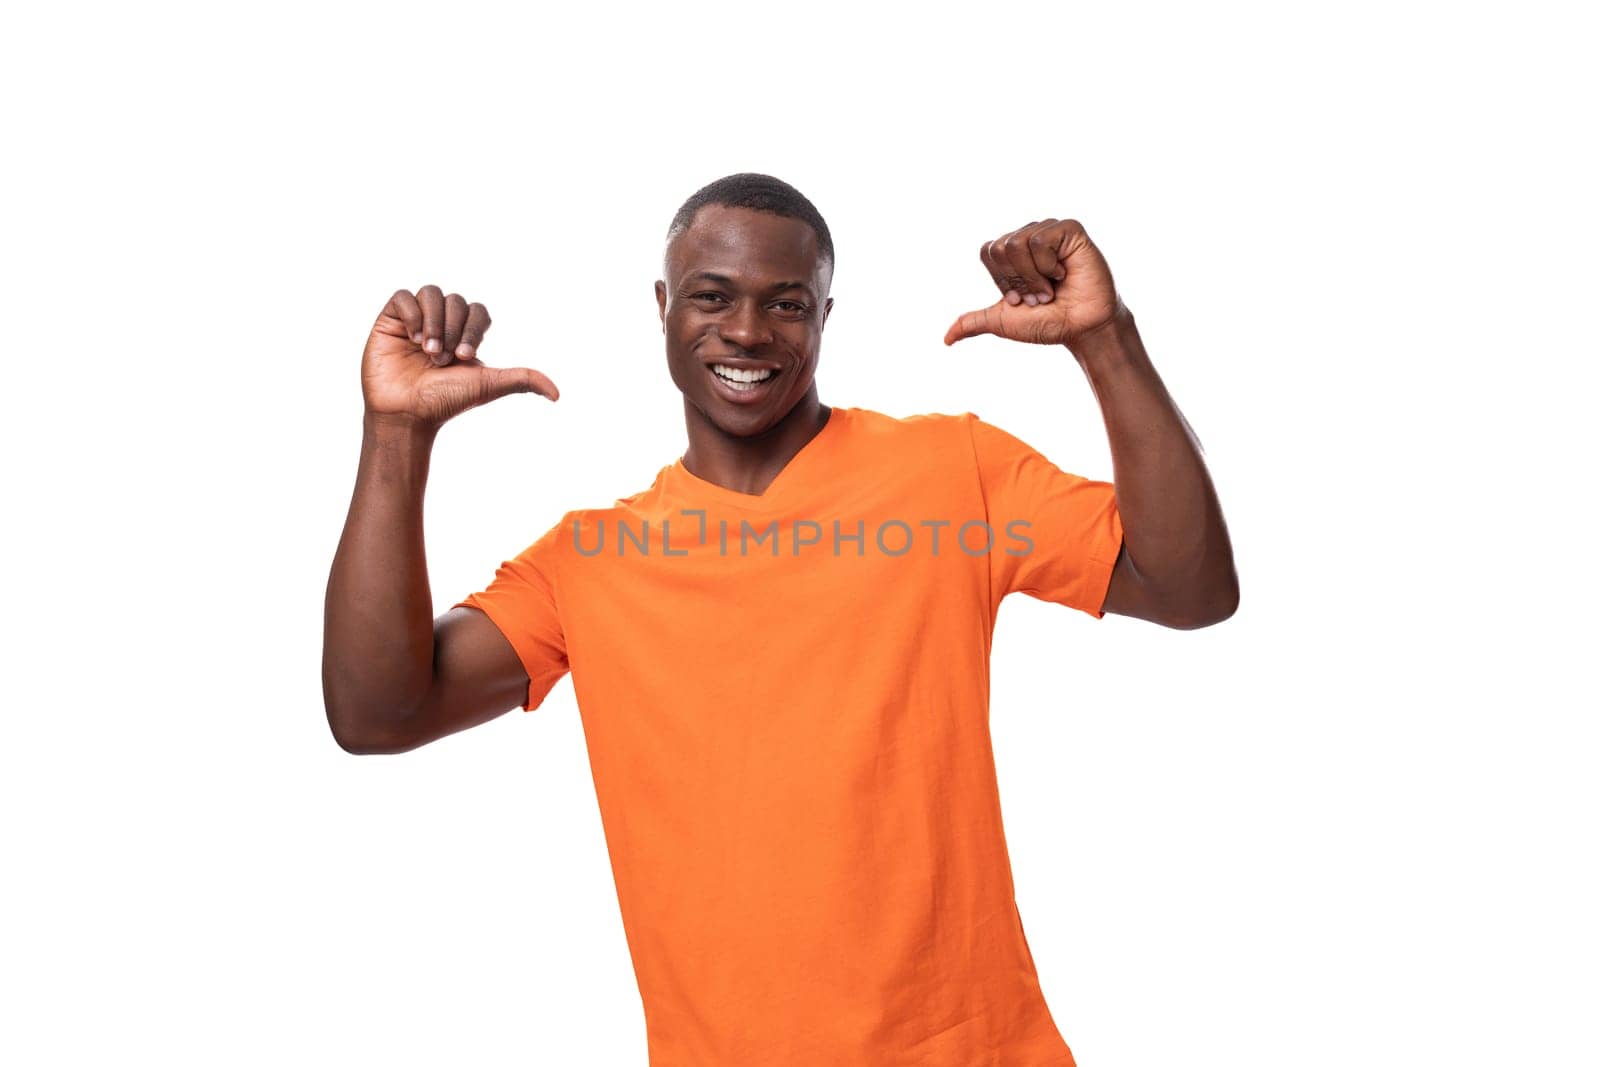 young nice kind american man dressed in an orange t-shirt on a white background with copy space.